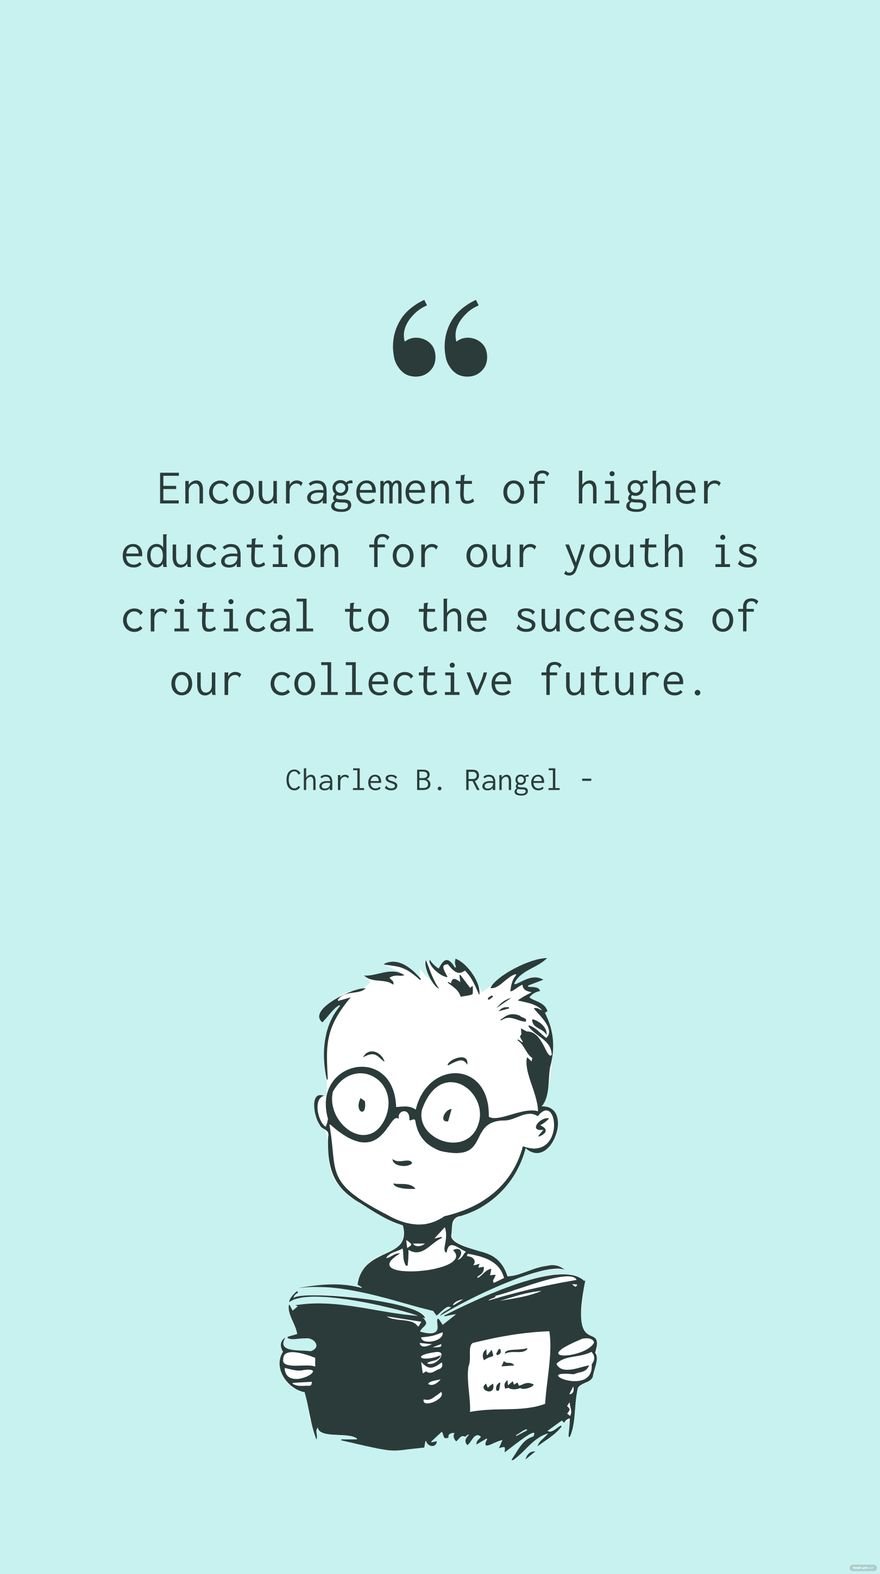 Charles B. Rangel - Encouragement of higher education for our youth is critical to the success of our collective future.